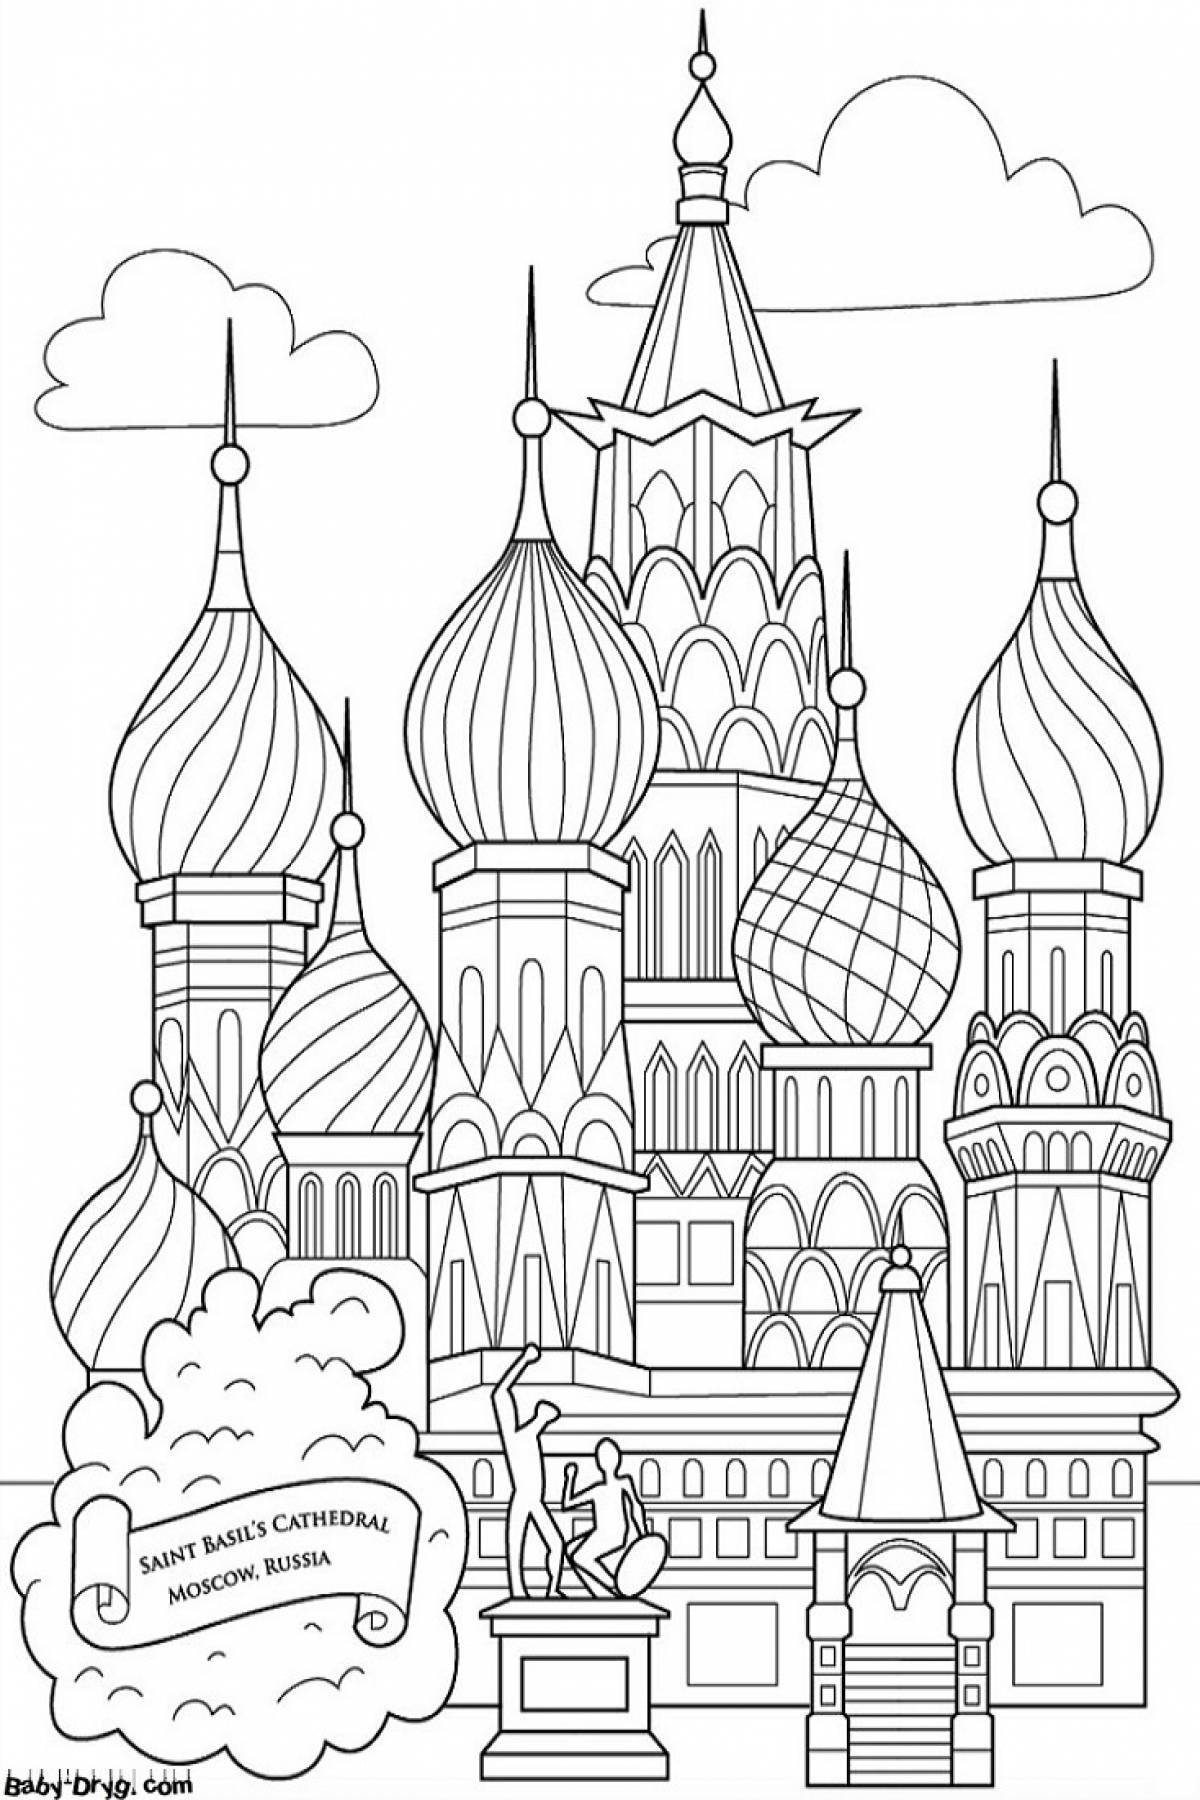 St. Basil's Cathedral #12